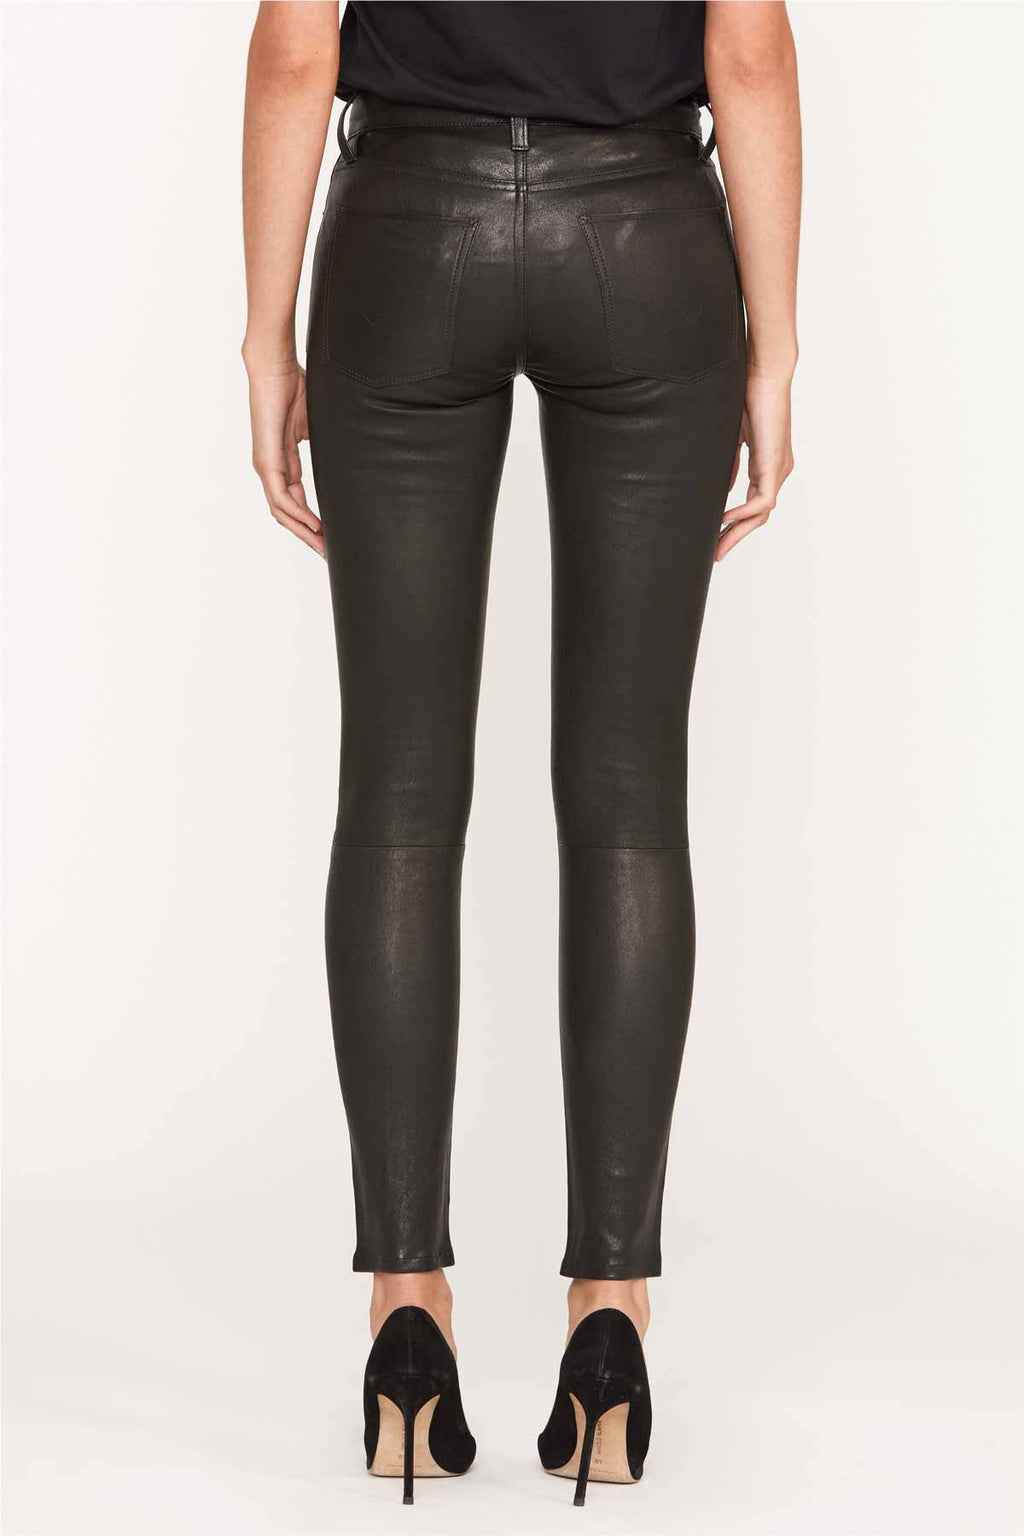 Shop Women's Leather at Hudson Jeans 